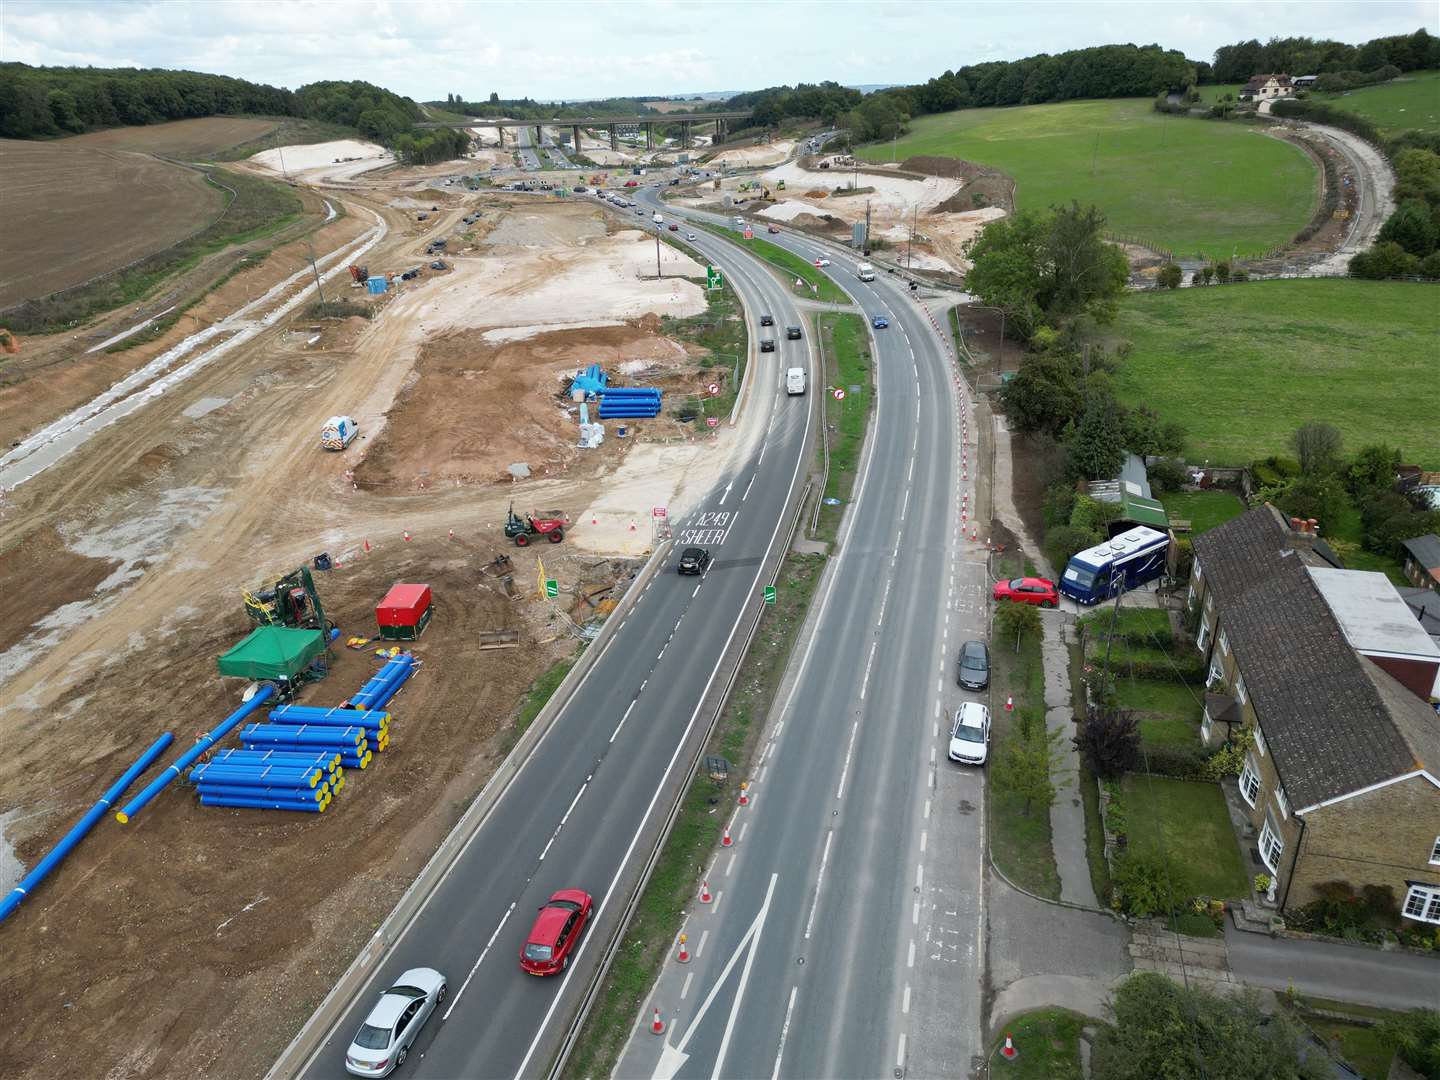 The A249 Stockbury roundabout at junction 5 of the M2 looking from Maidstone. Picture: Barry Goodwin